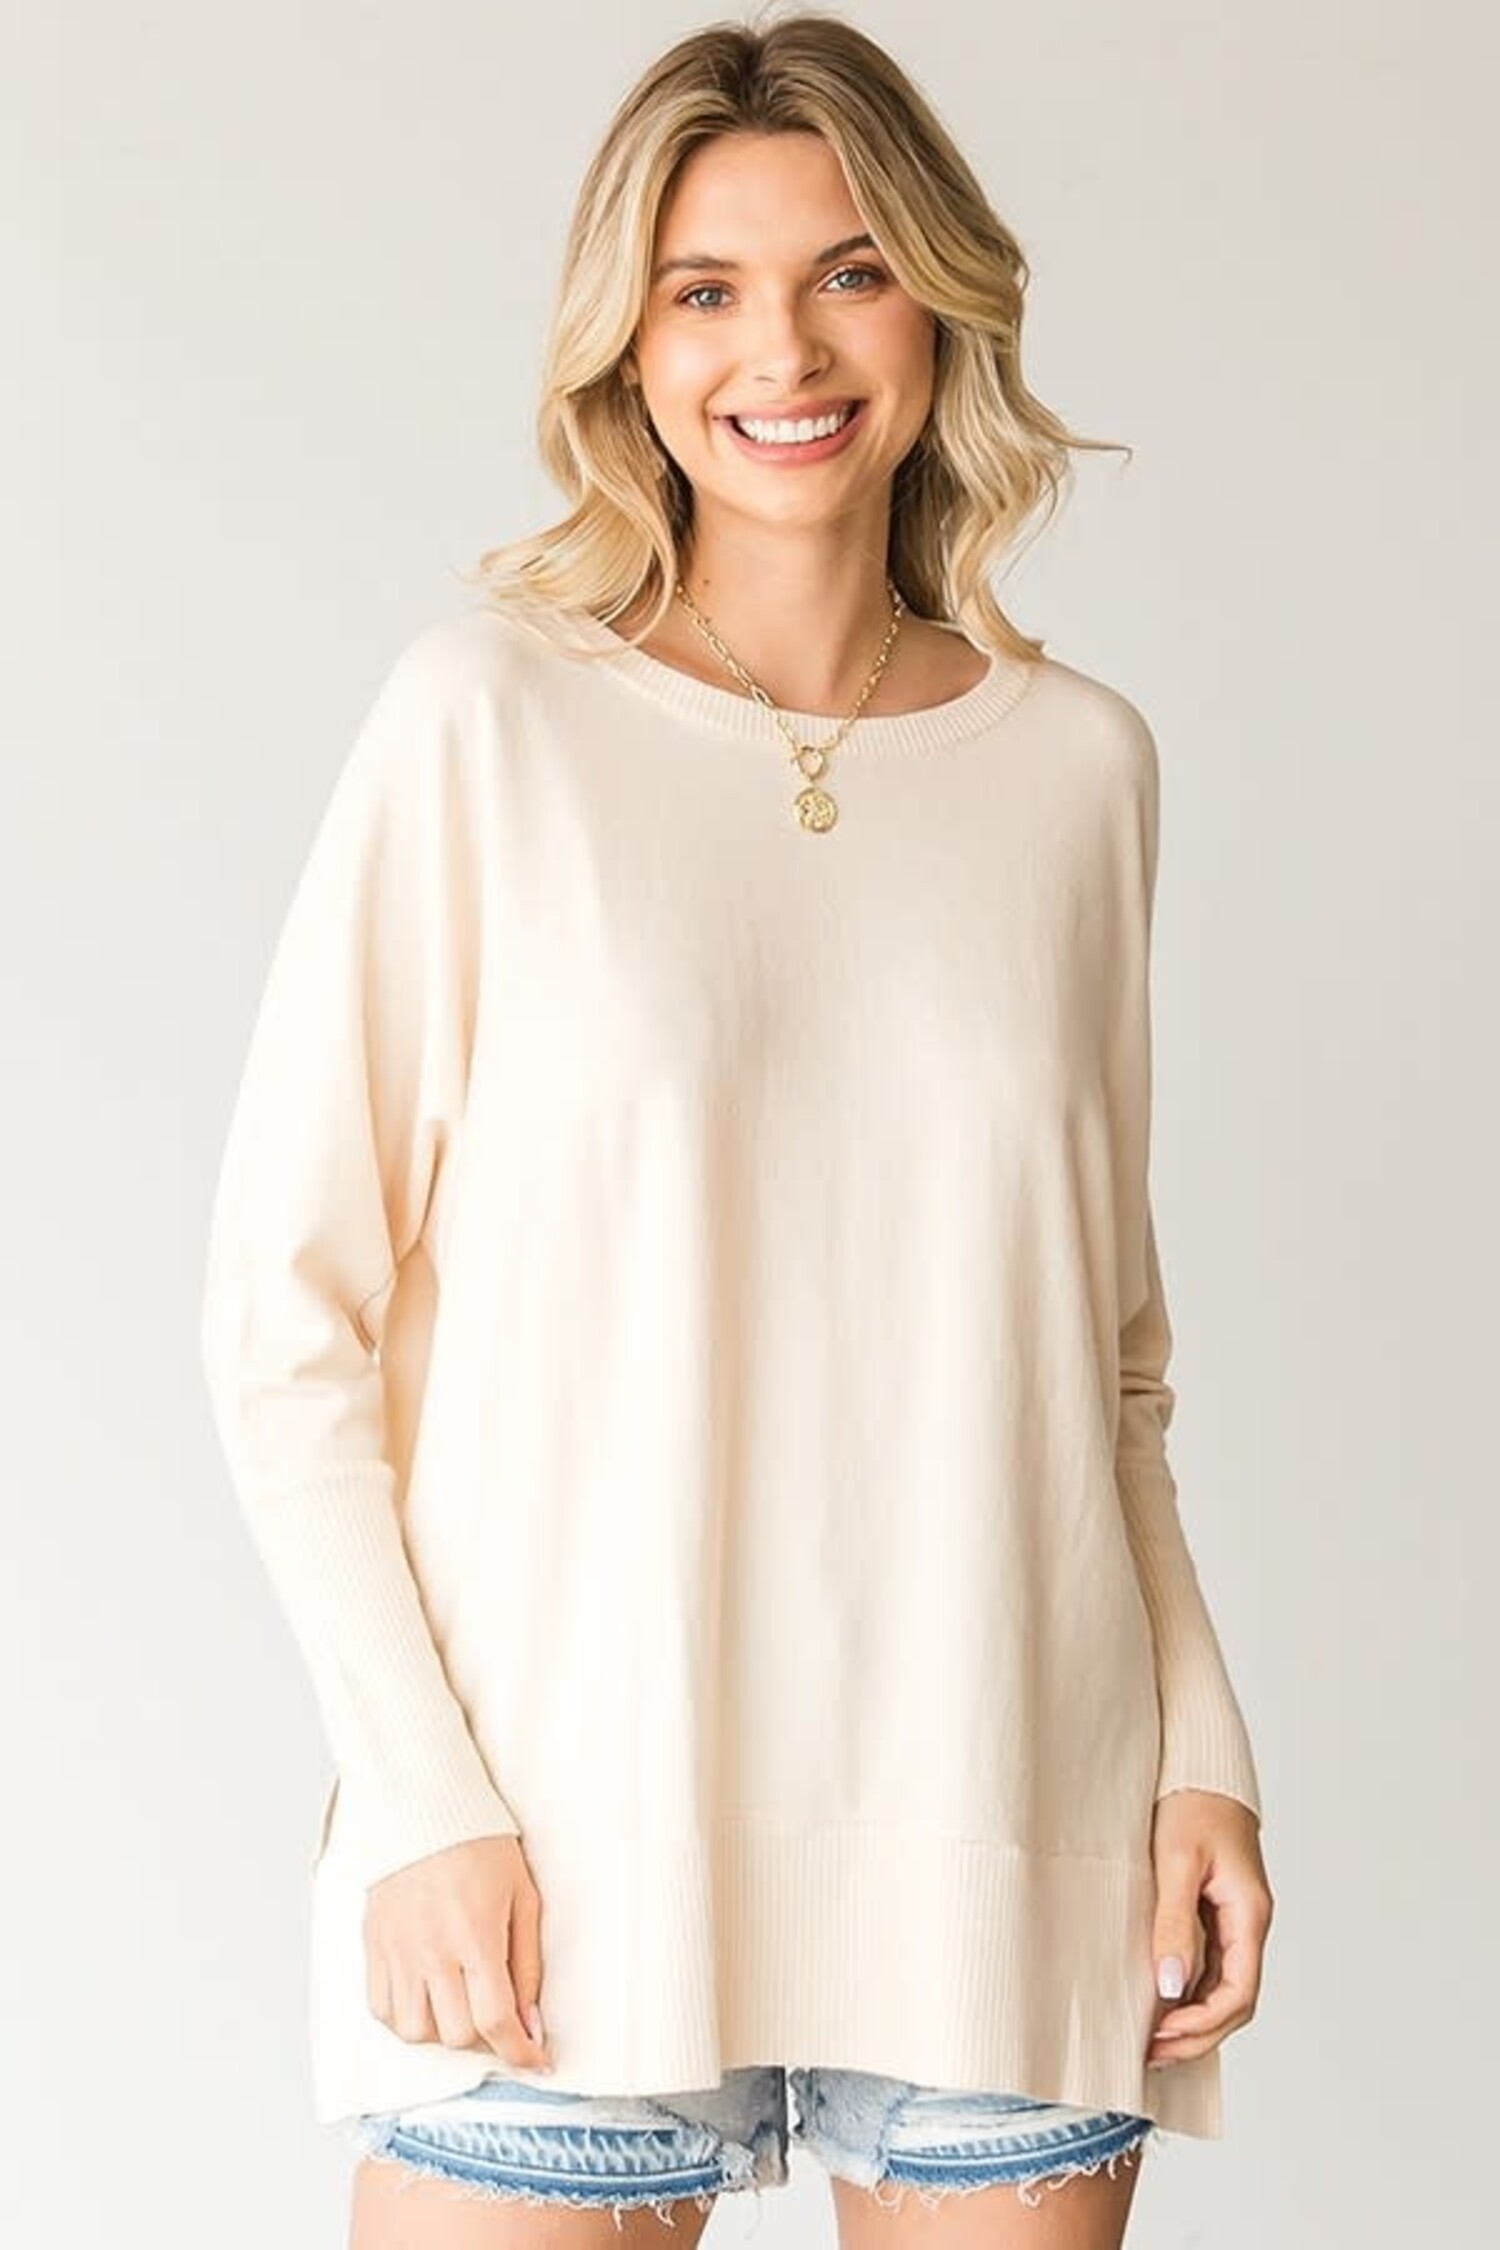 24/7 Comfort Apparel Women's Loose Fit Dolman Top with Wide Sleeves